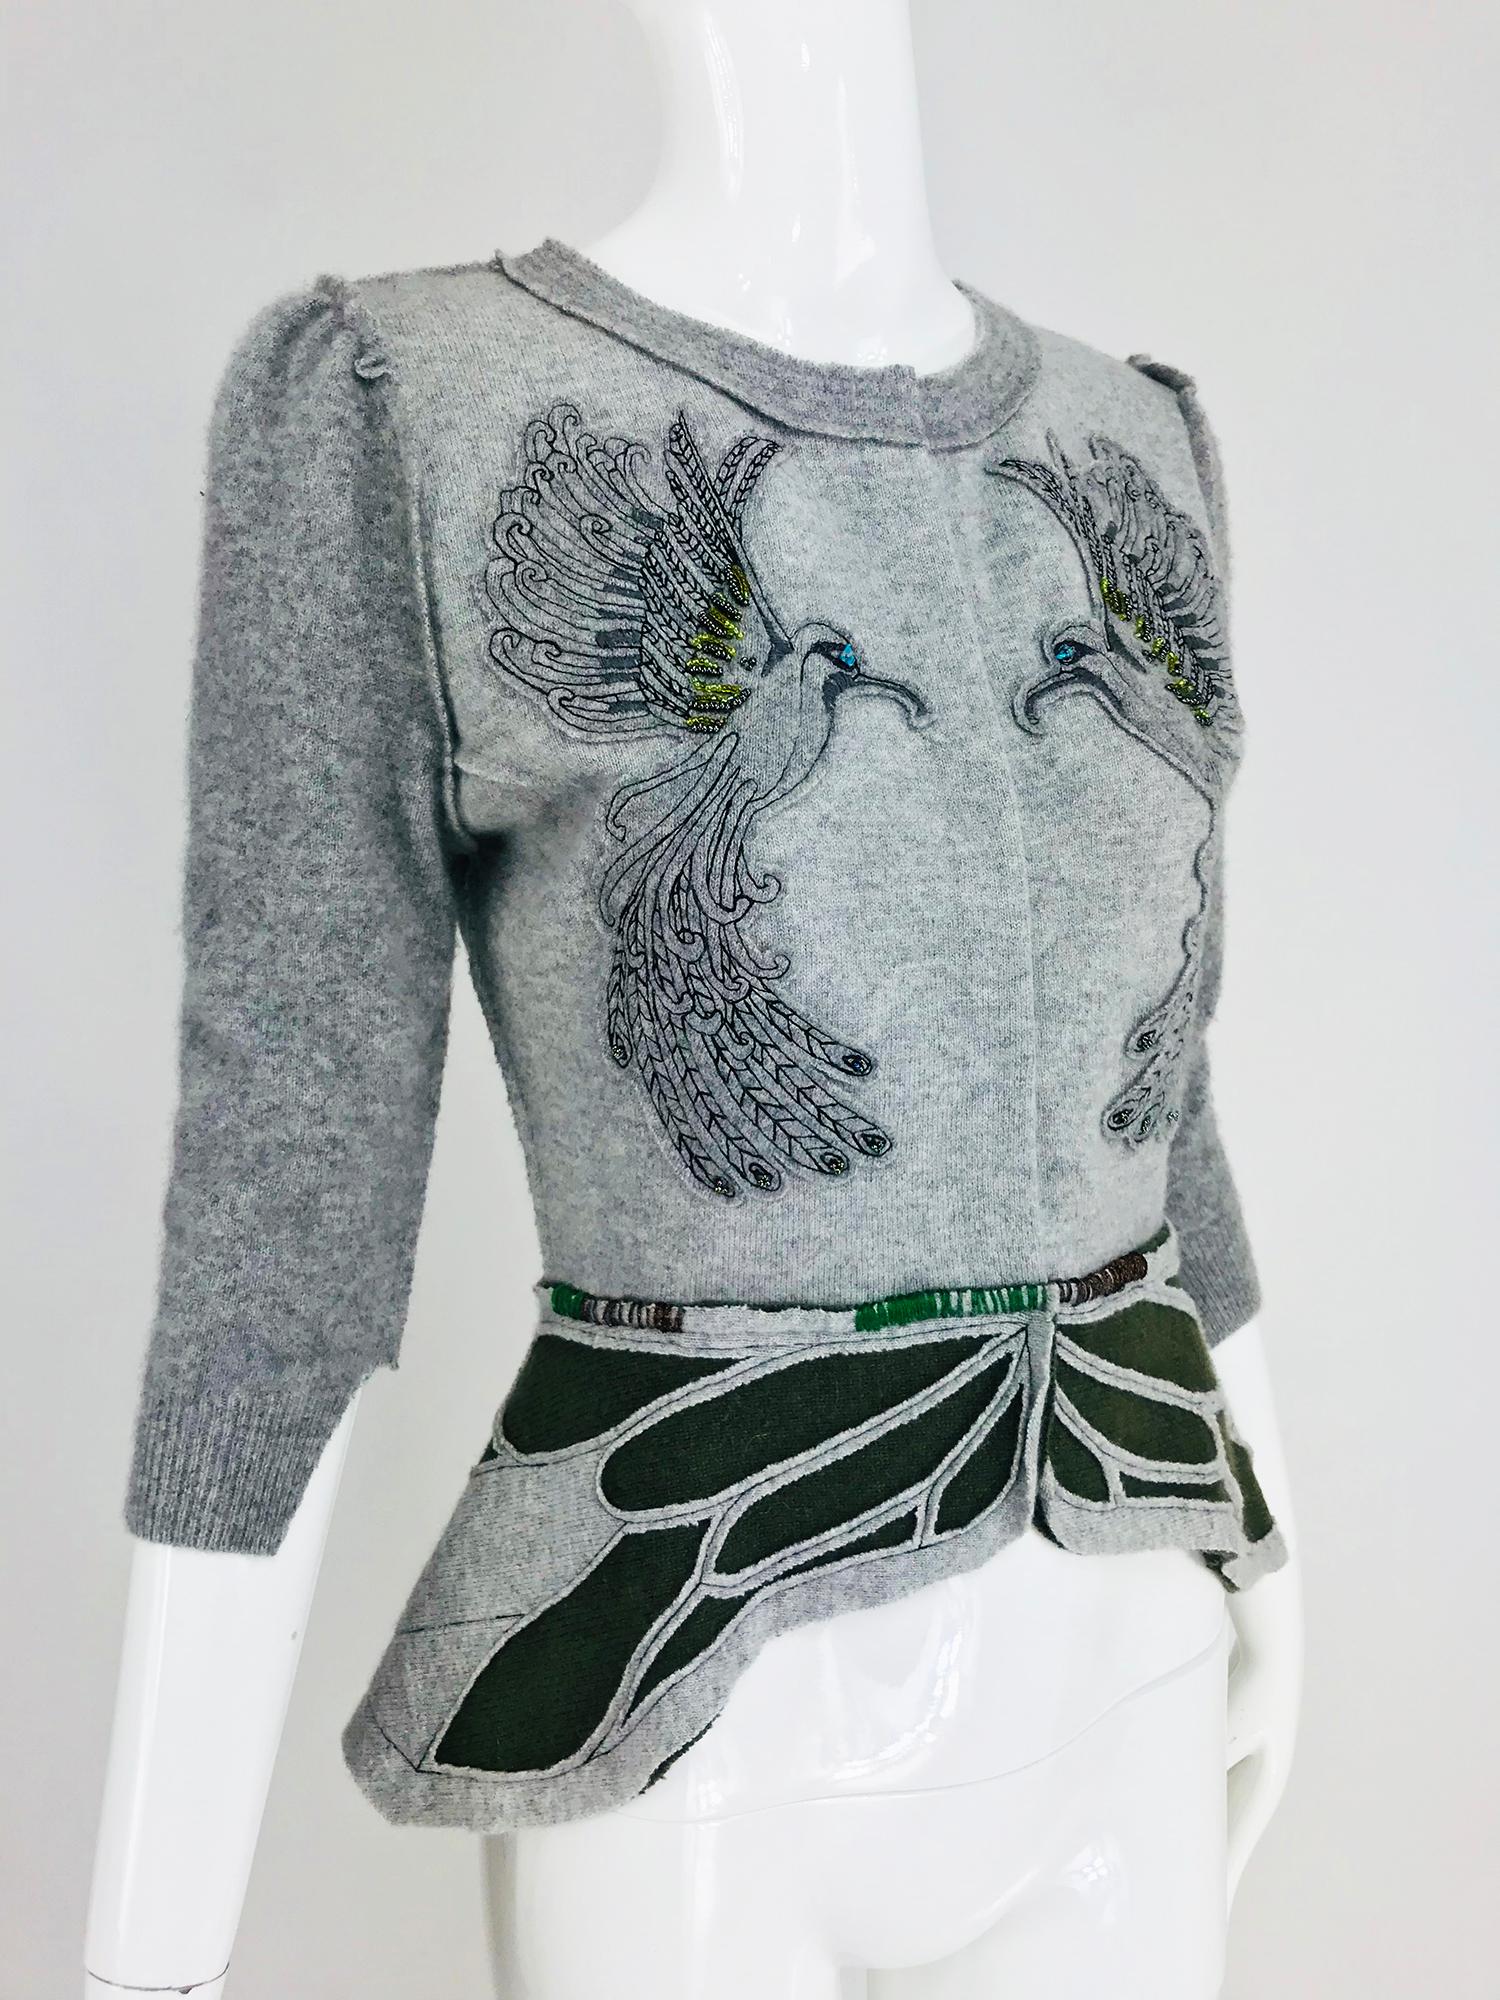 Koi Suwannagate cashmere bird applique sweater, artisan style sweater in pale grey fleck cashmere with embroidered birds appliqued at each front panel. The elbow length sleeve sweater has a peplum waist, the peplum has inset panels of moss green